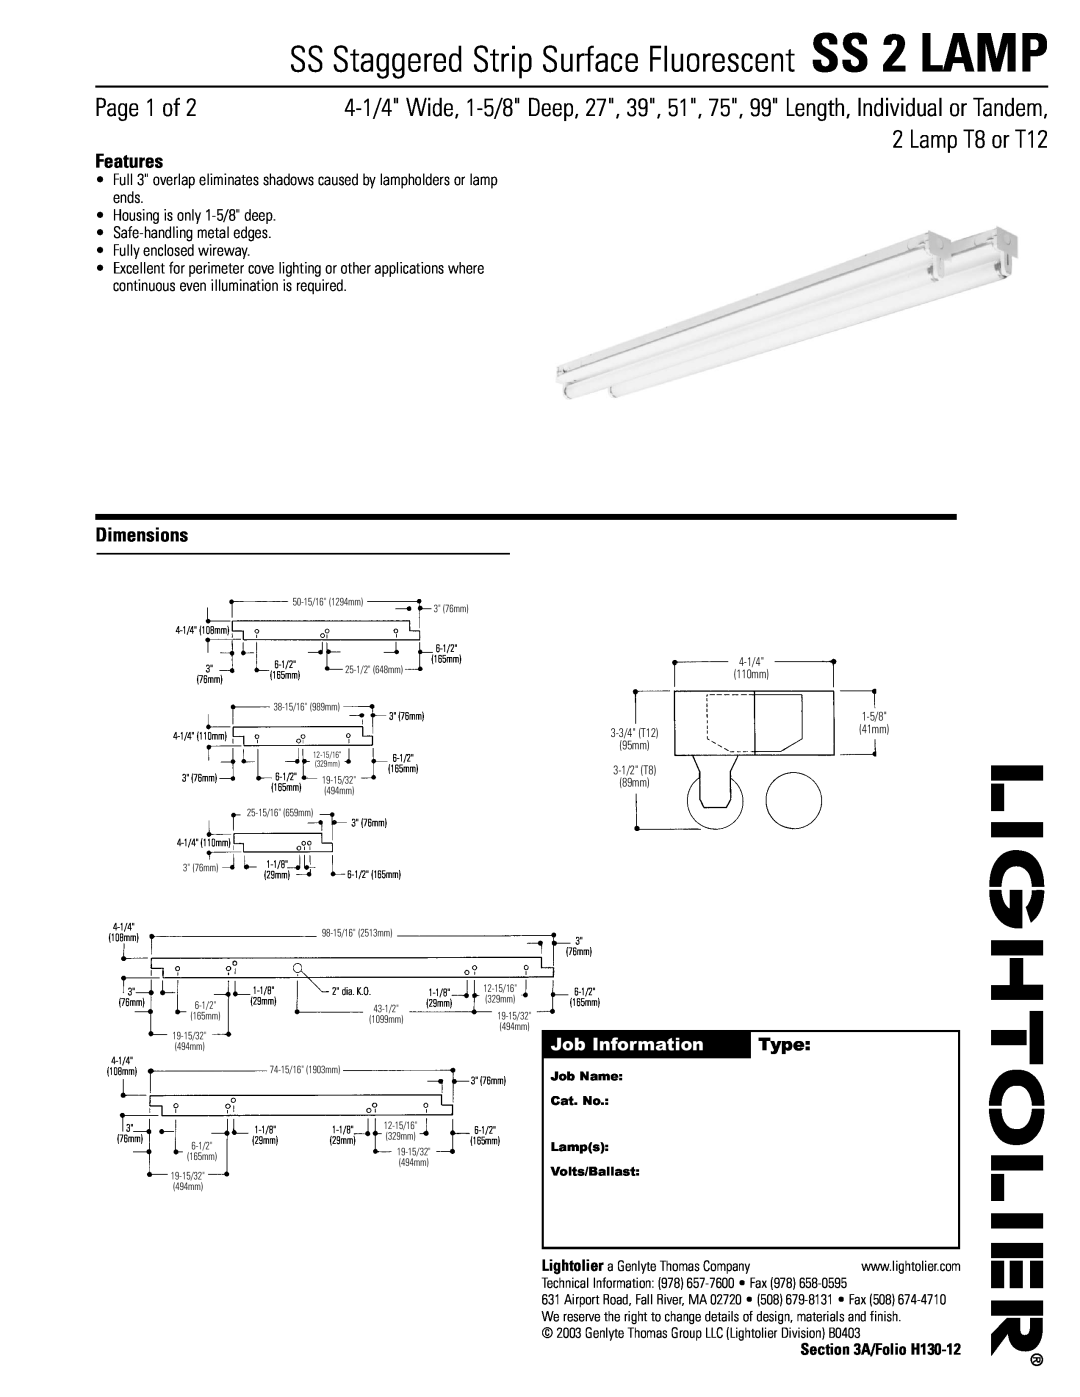 Lightolier dimensions SS Staggered Strip Surface Fluorescent SS 2 LAMP, Features, Dimensions, Job Information Type 